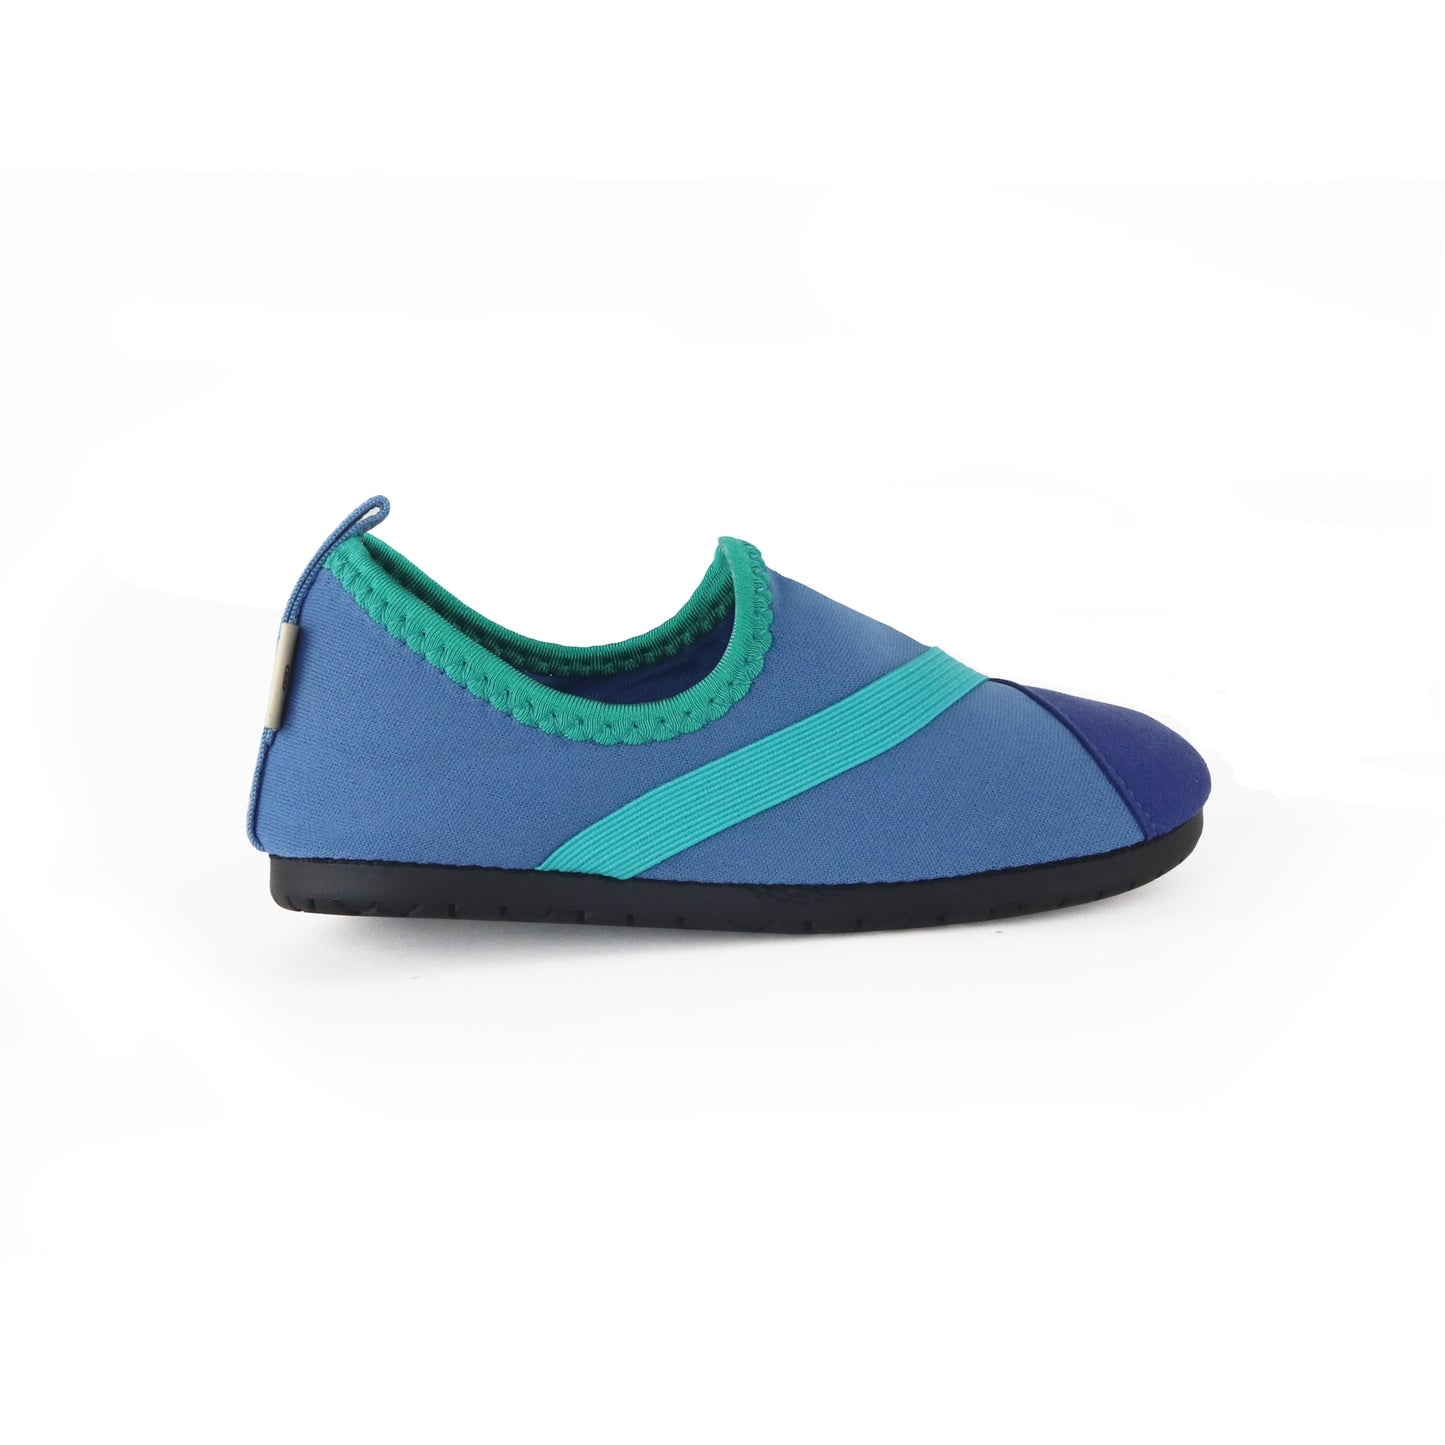 FITKIDS Active Lifestyle Fitkicks Shoes for Kids - Blue